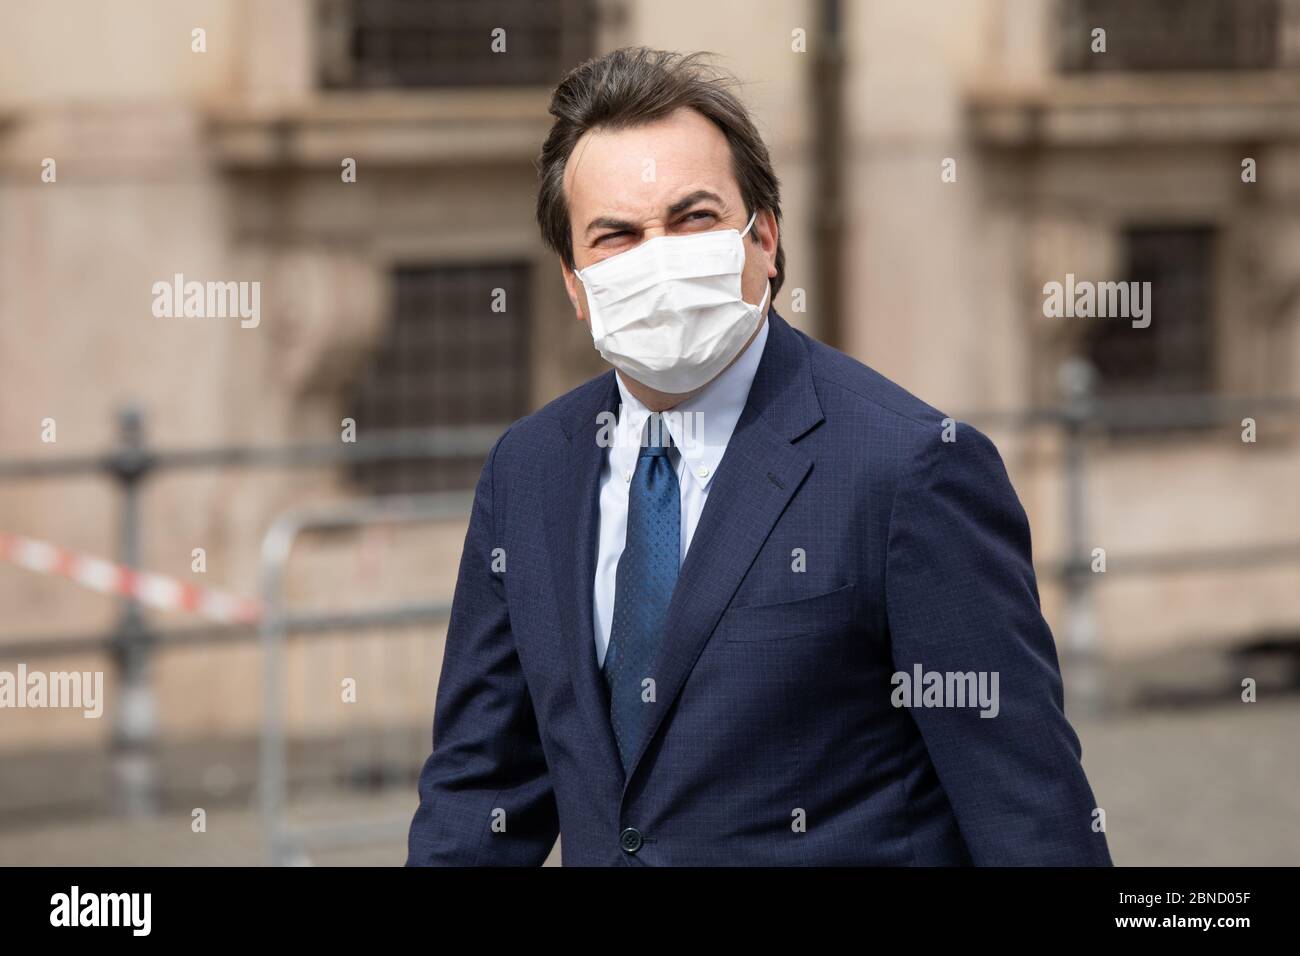 Rome, Italy. 13th May, 2020. Italian Minister for European Affairs, Vincenzo Amendola, enters Palazzo Chigi before the Council of Ministers while wearing a face mask as a precaution against the spread of corona virus. Credit: Cosimo Martemucci/SOPA Images/ZUMA Wire/Alamy Live News Stock Photo